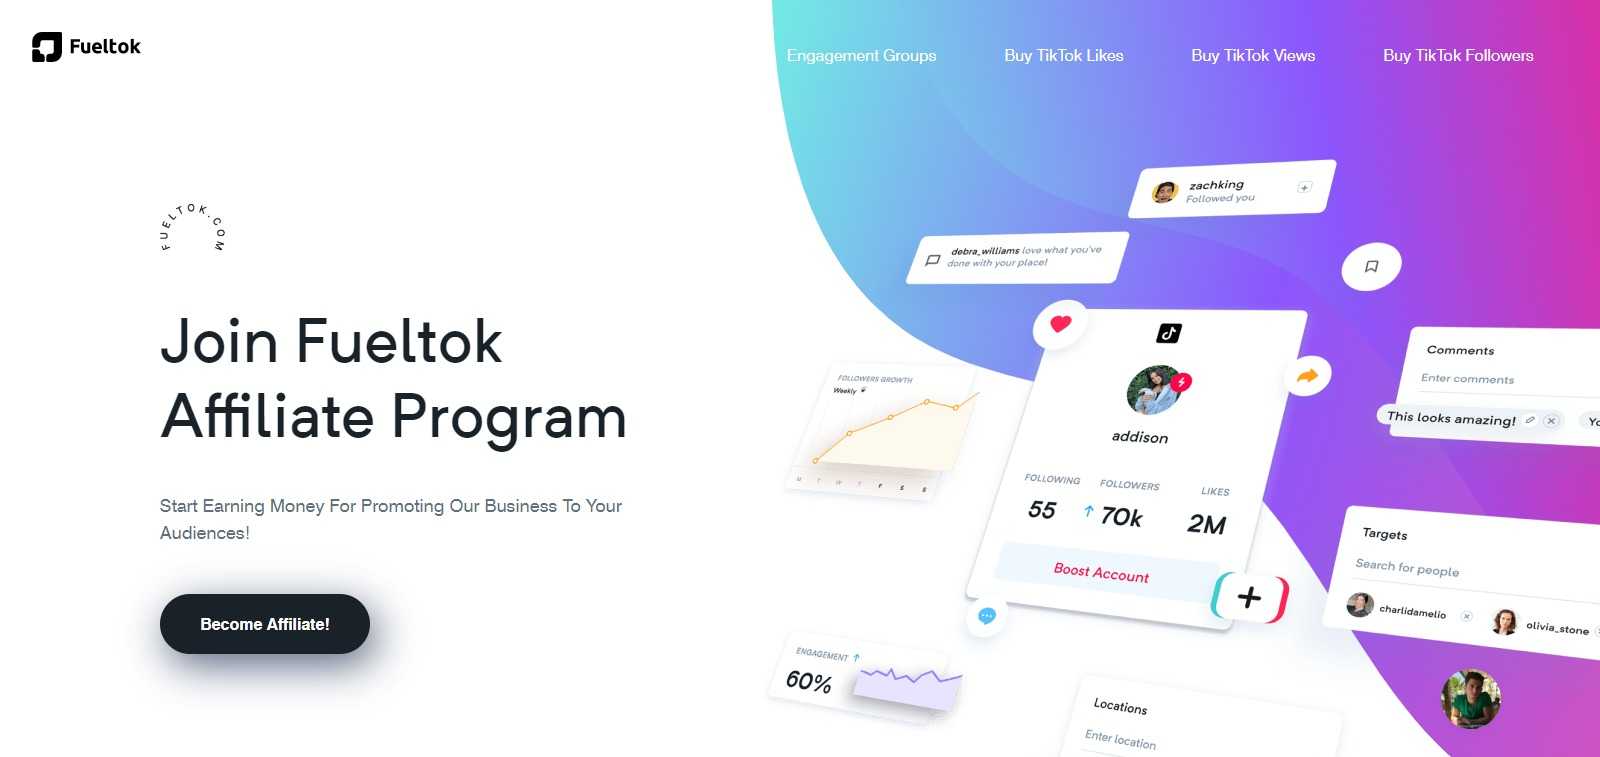 Fueltok Affiliate Program Review: Get Earn 10% - 30% Recurring commission